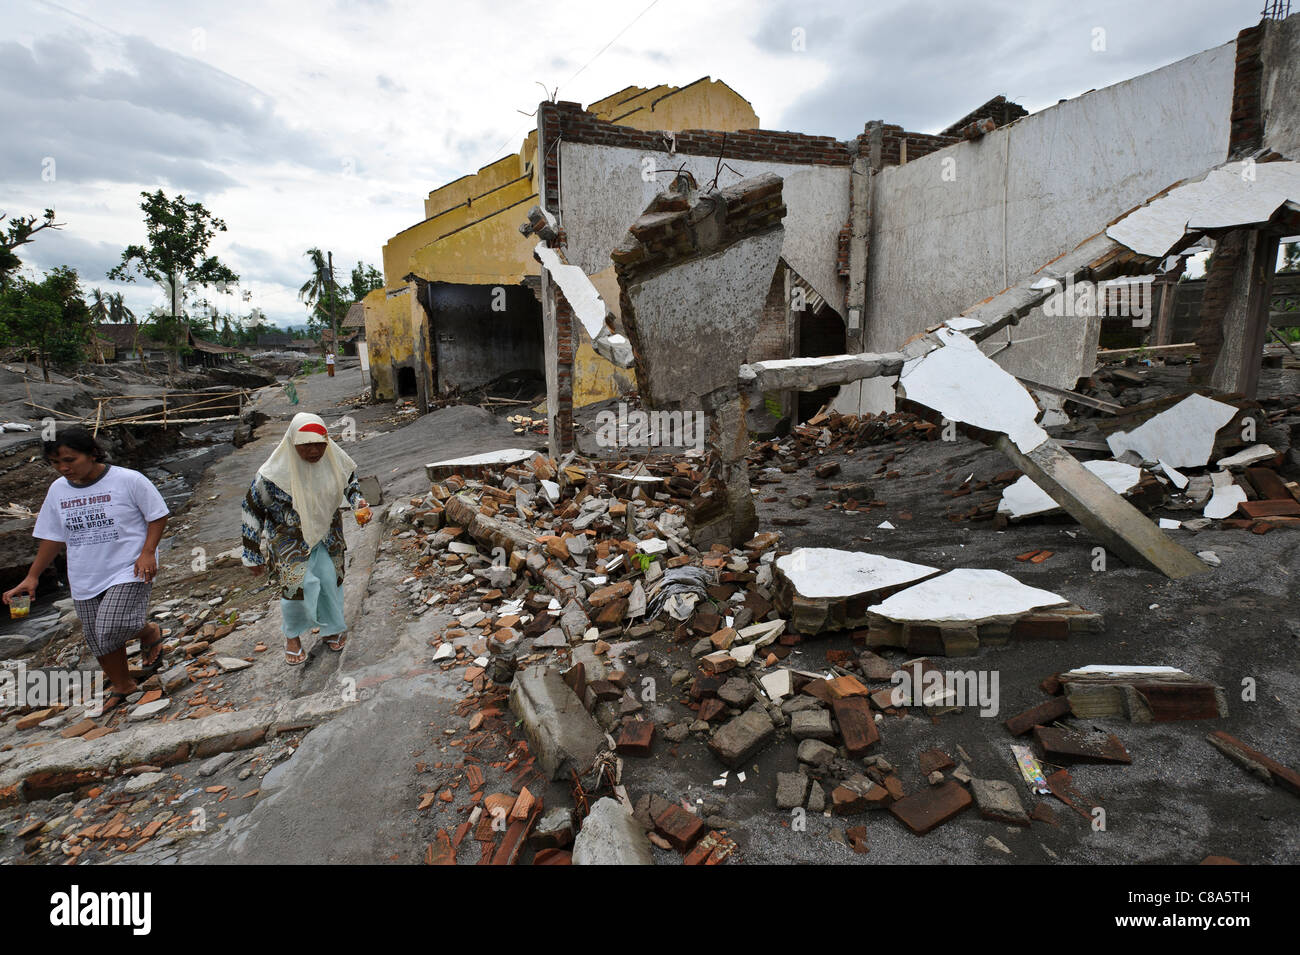 Houses badly damaged by a lahar mud flow in March 2011, Sirahan, Magelang, Yogyakarta, Java, Indonesia. Stock Photo